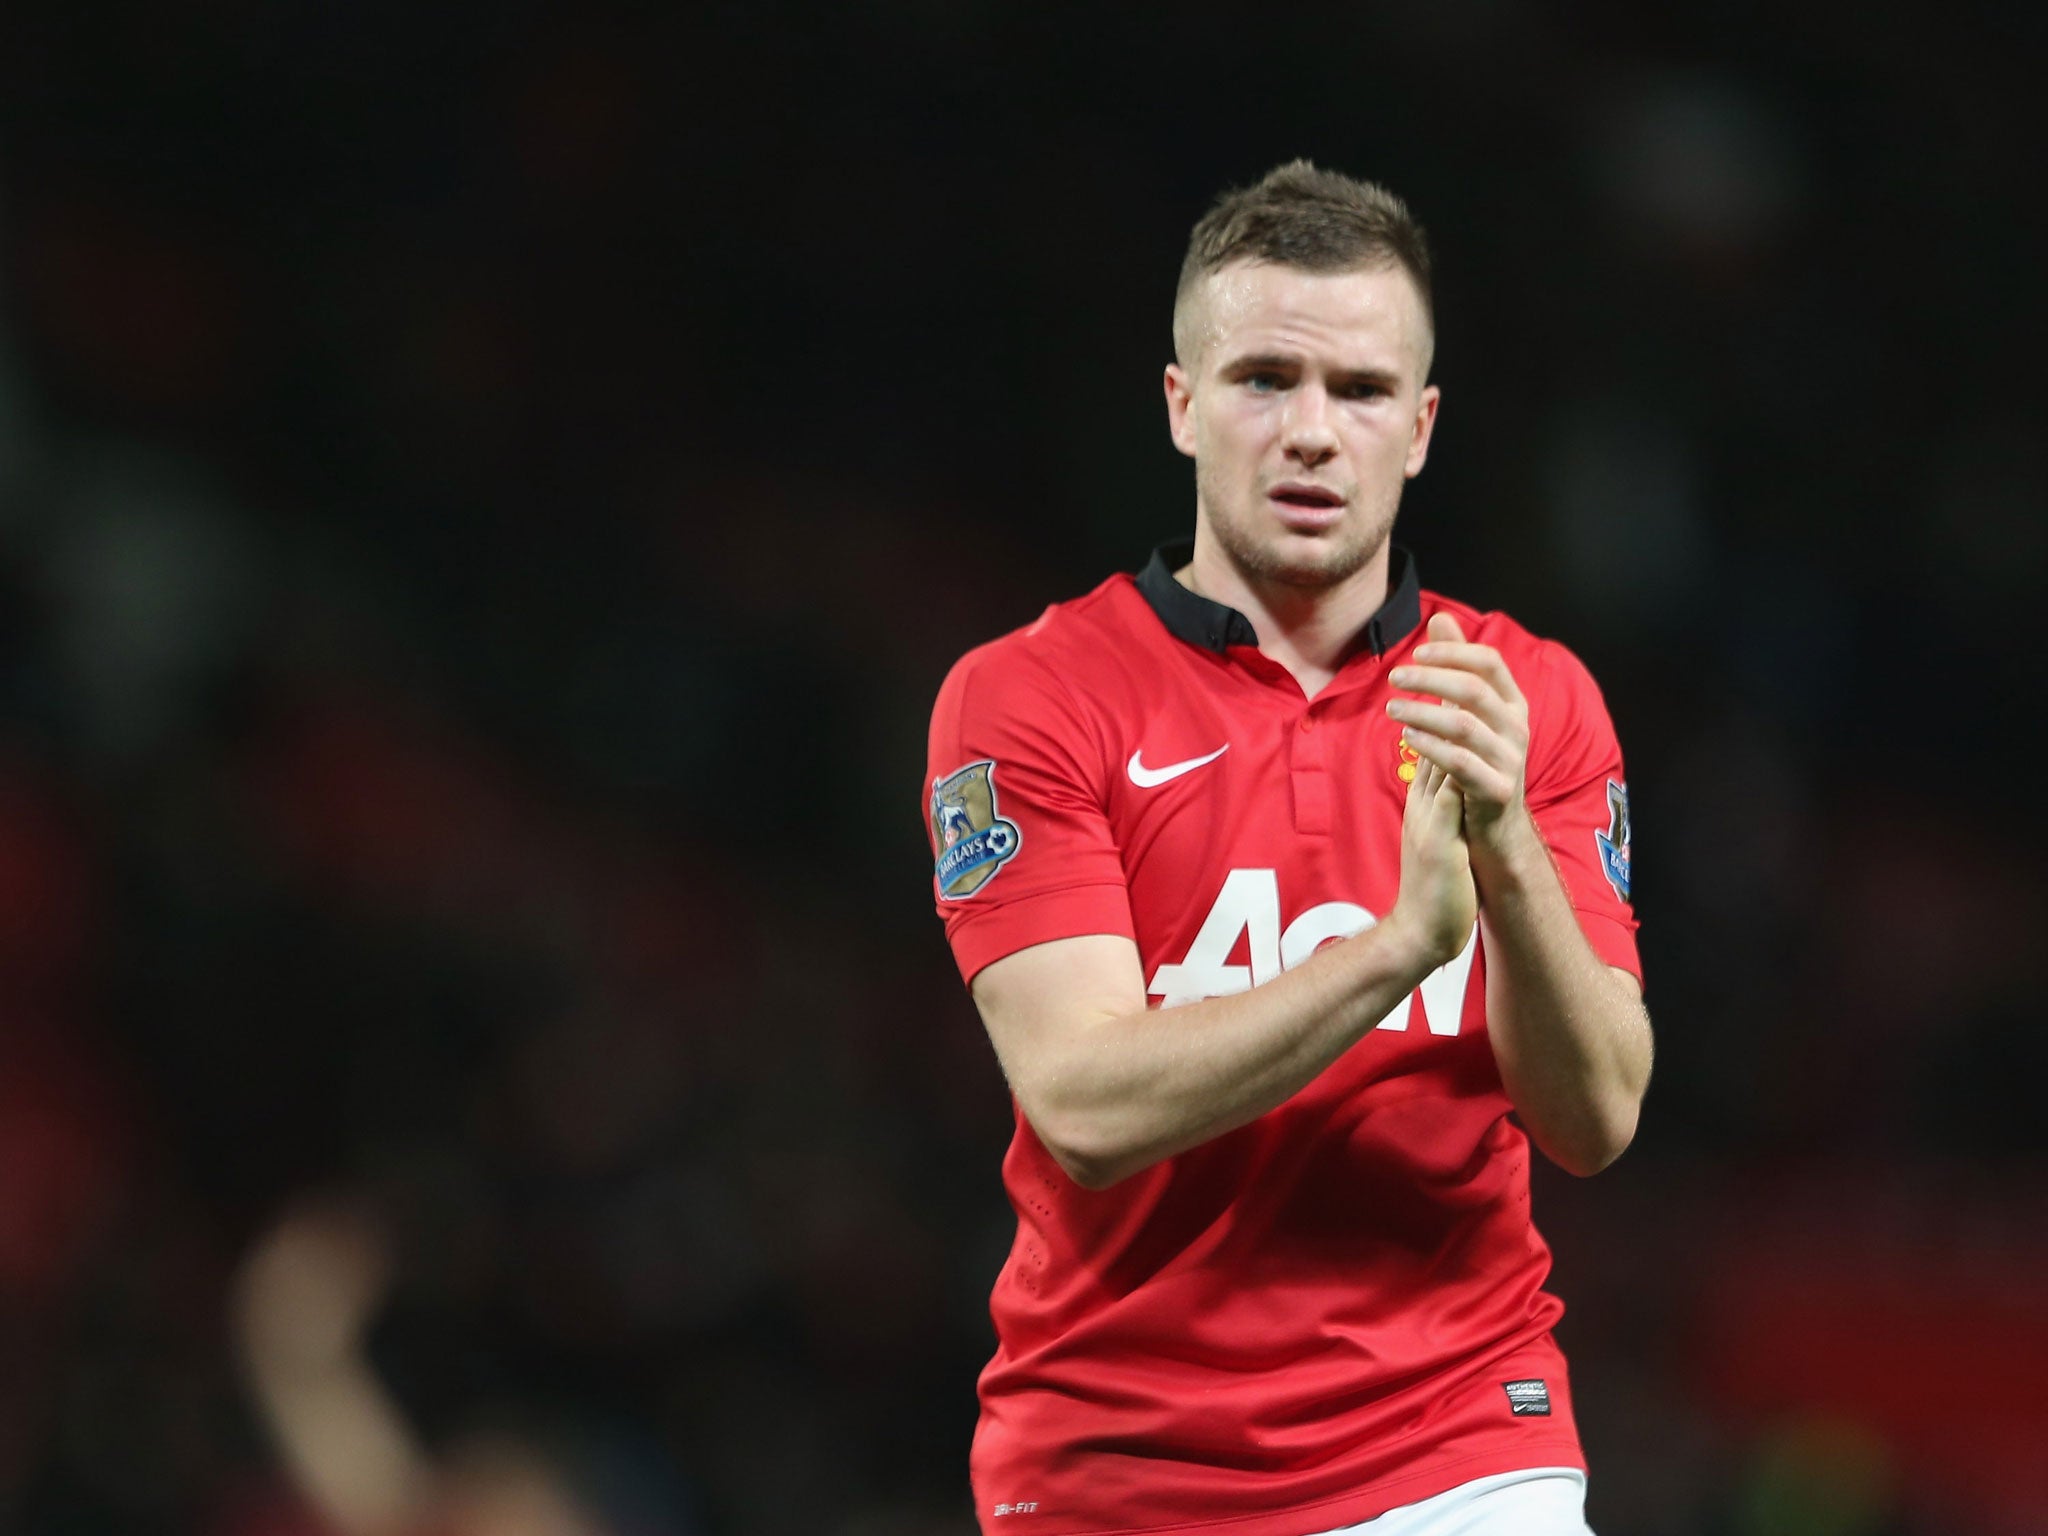 Cleverley struggled at times last season but says the experience has toughened him up